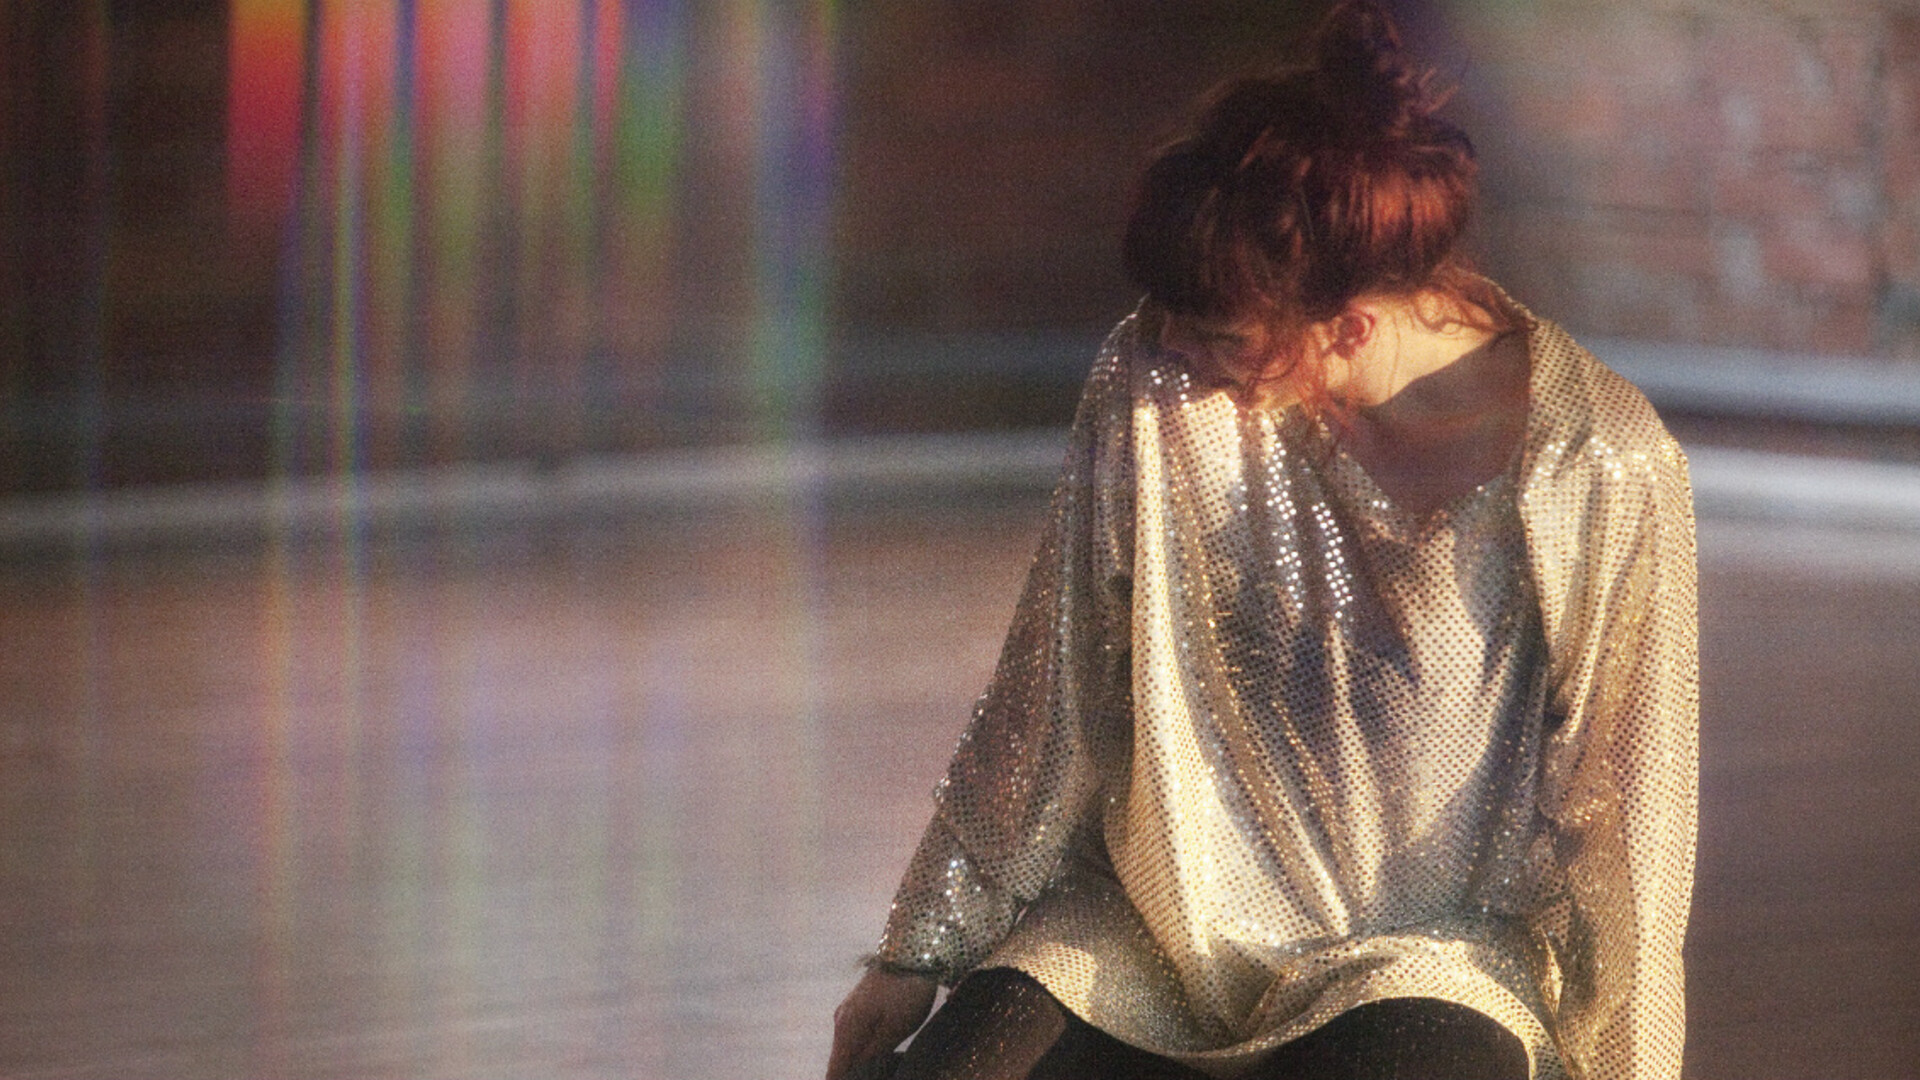 A woman kneels and looks away from the camera to her right in a sparkly dress. The light in the image creates a rainbow effect on the left